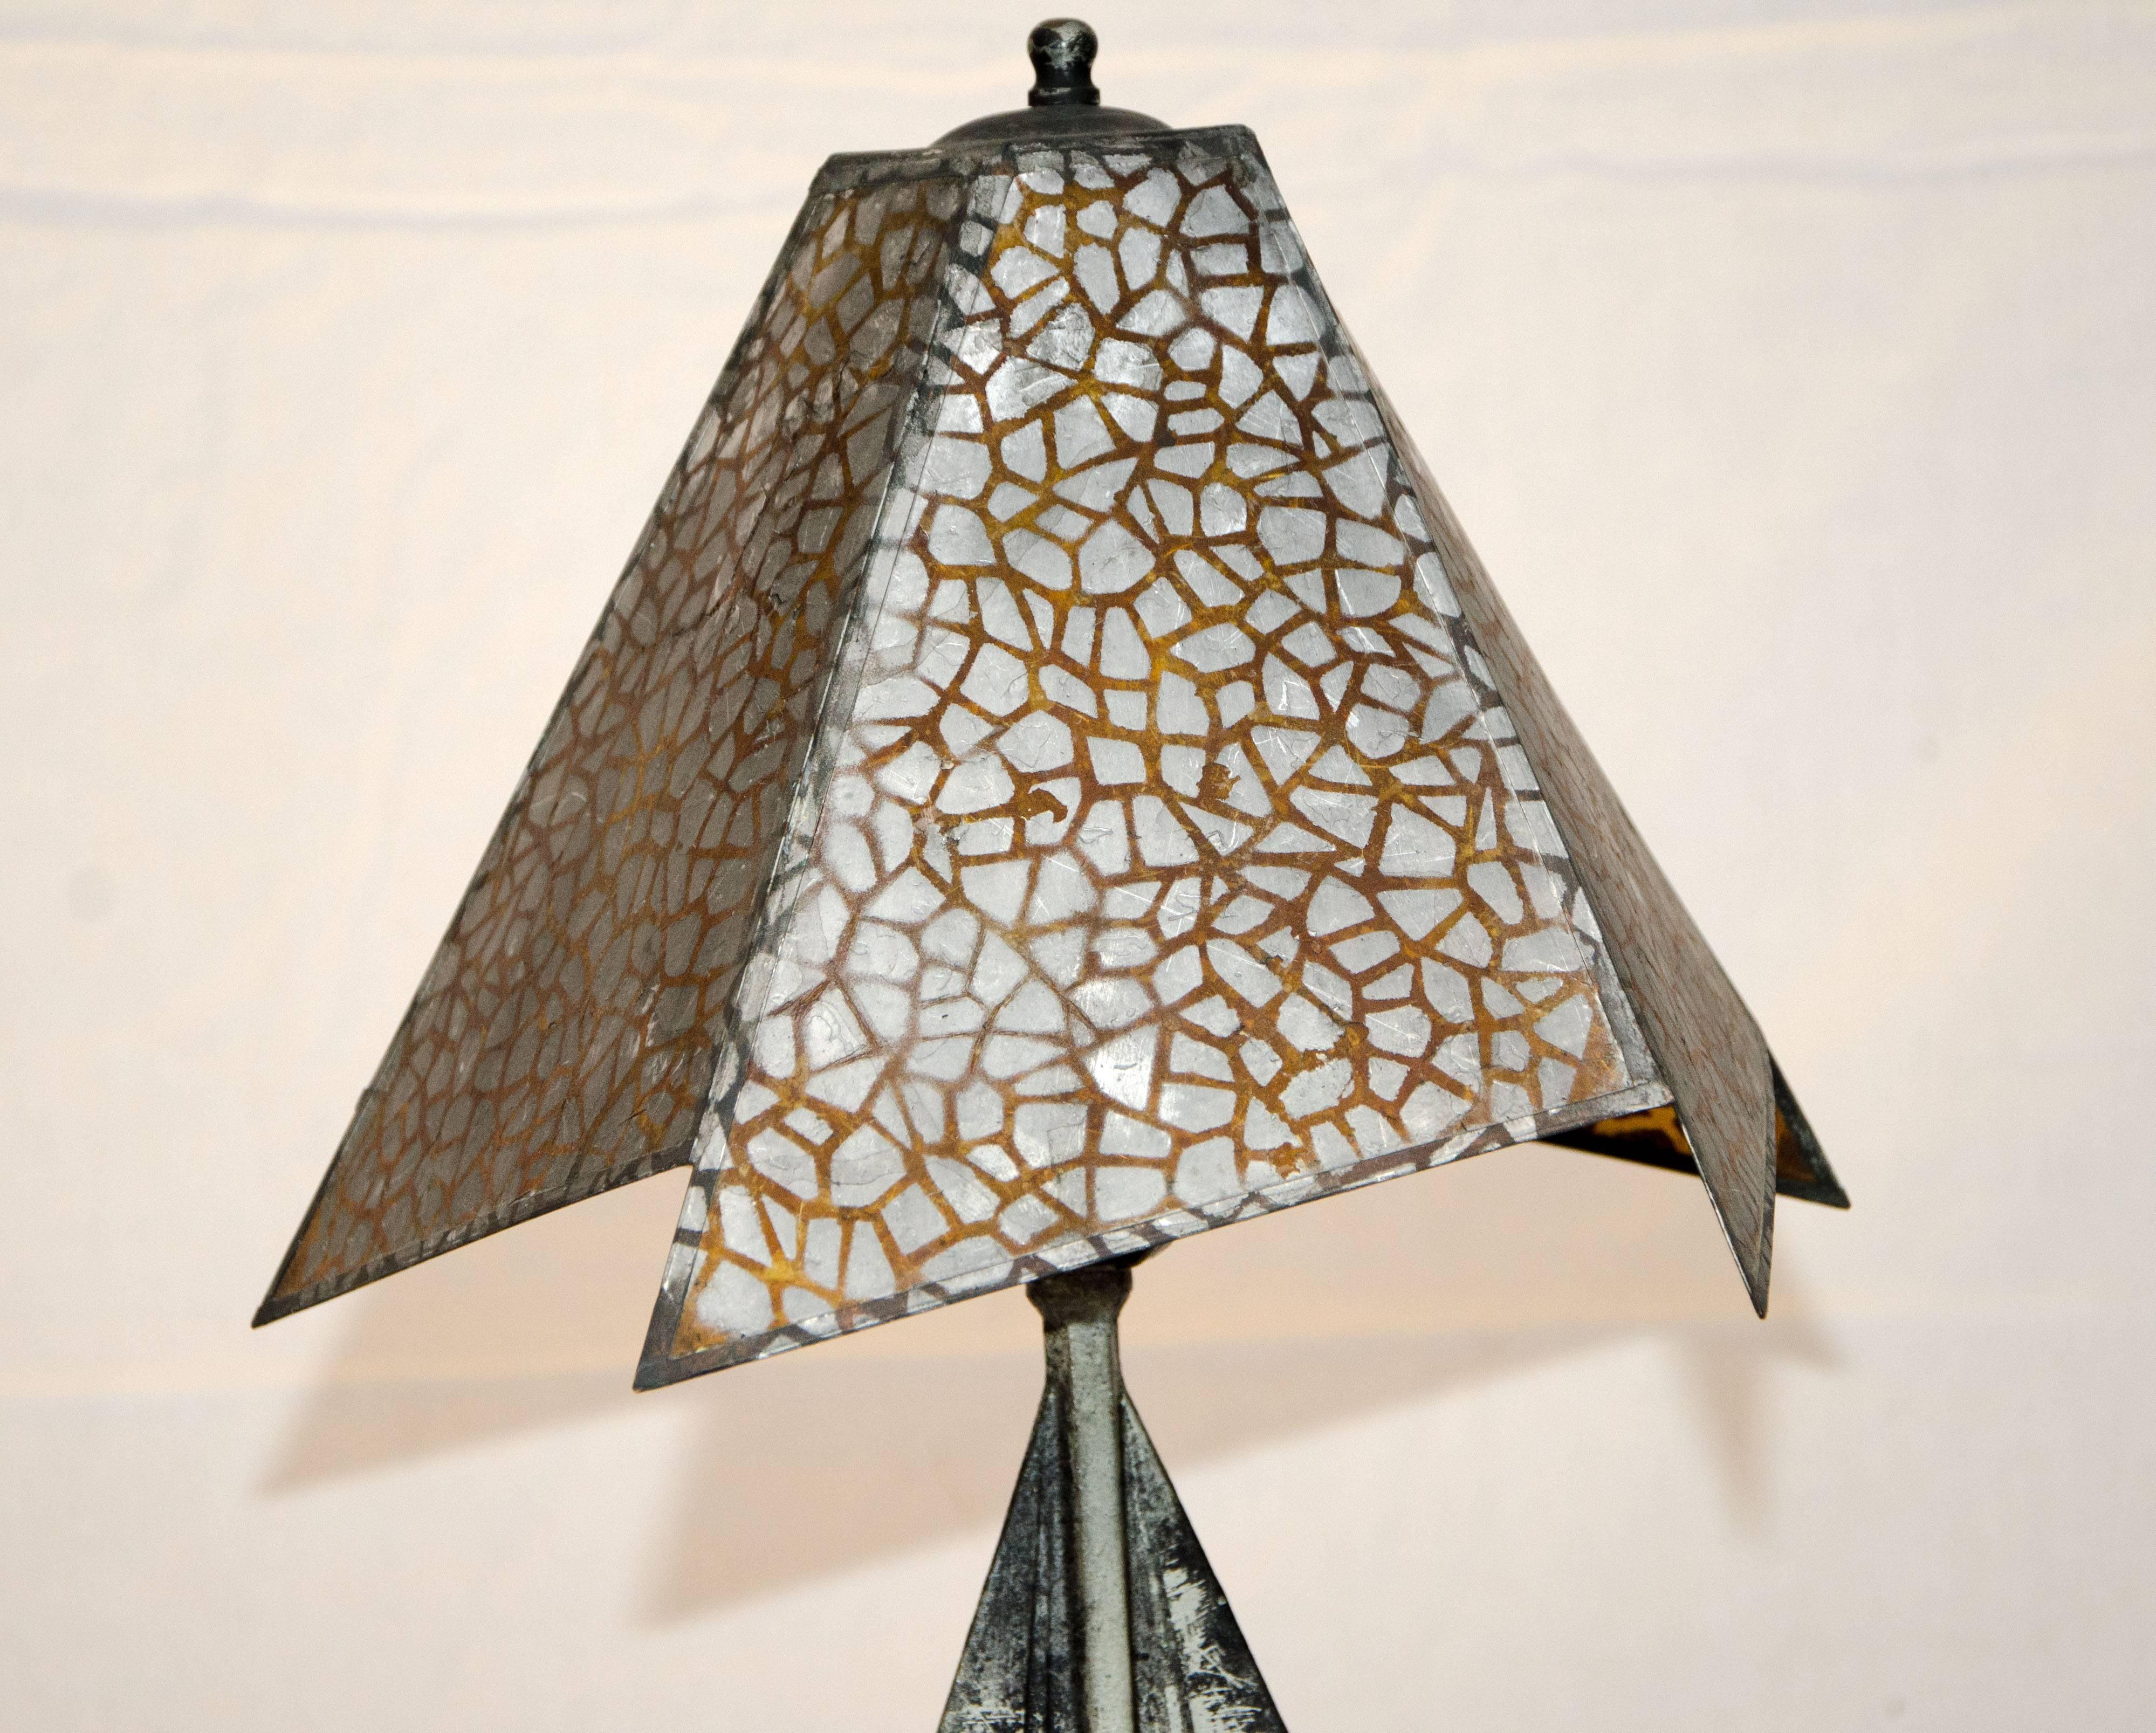 Small Art Deco Accent Lamp, Mica Shade In Good Condition For Sale In Crockett, CA